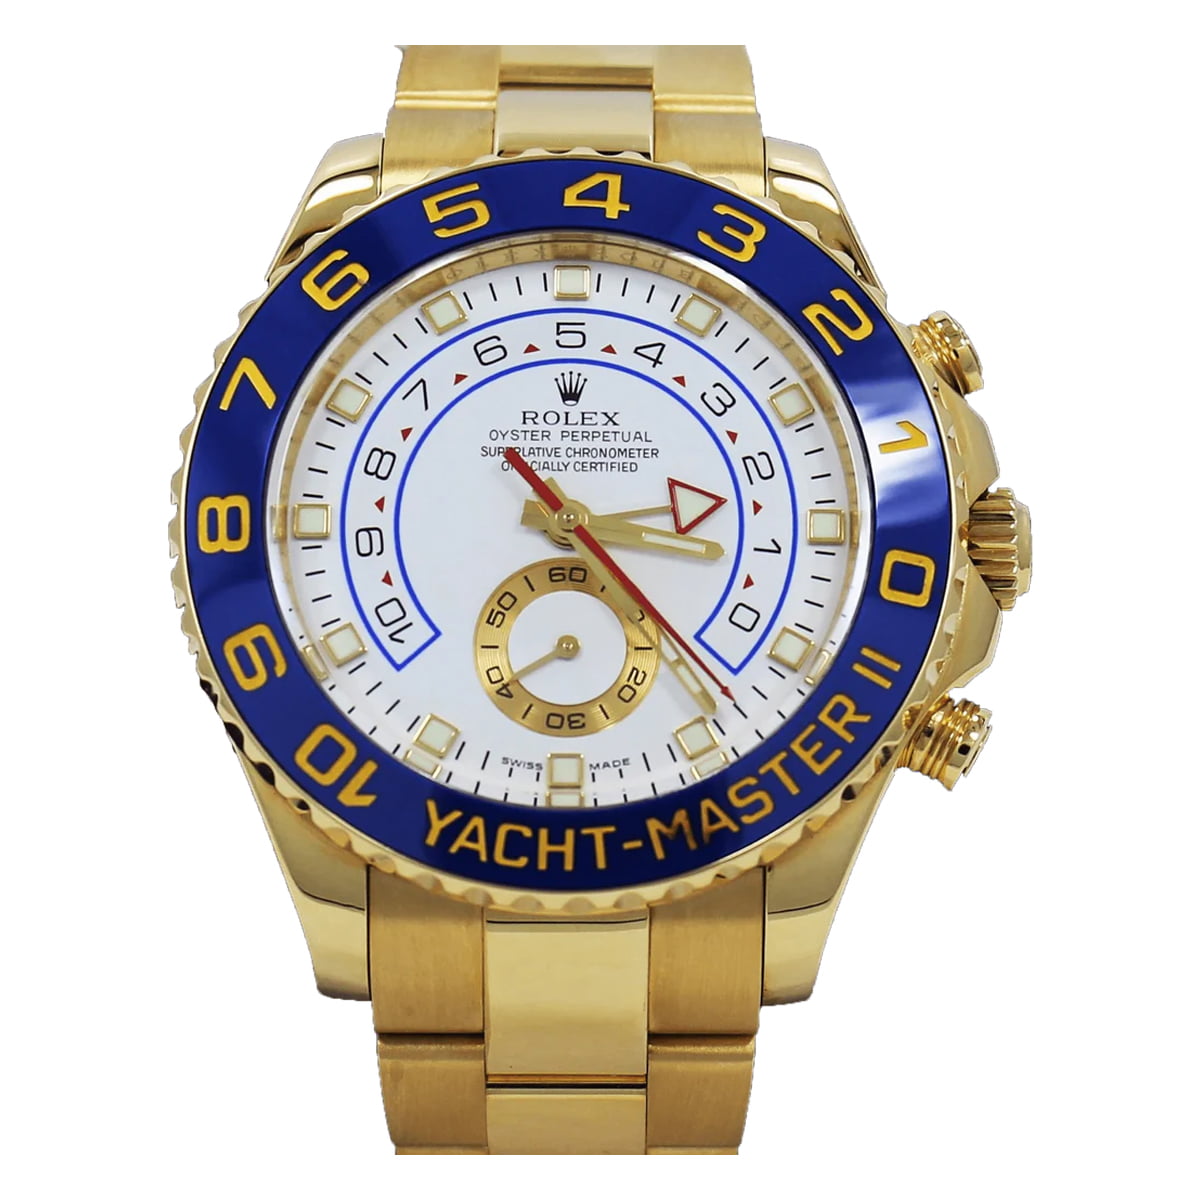 yacht master course price